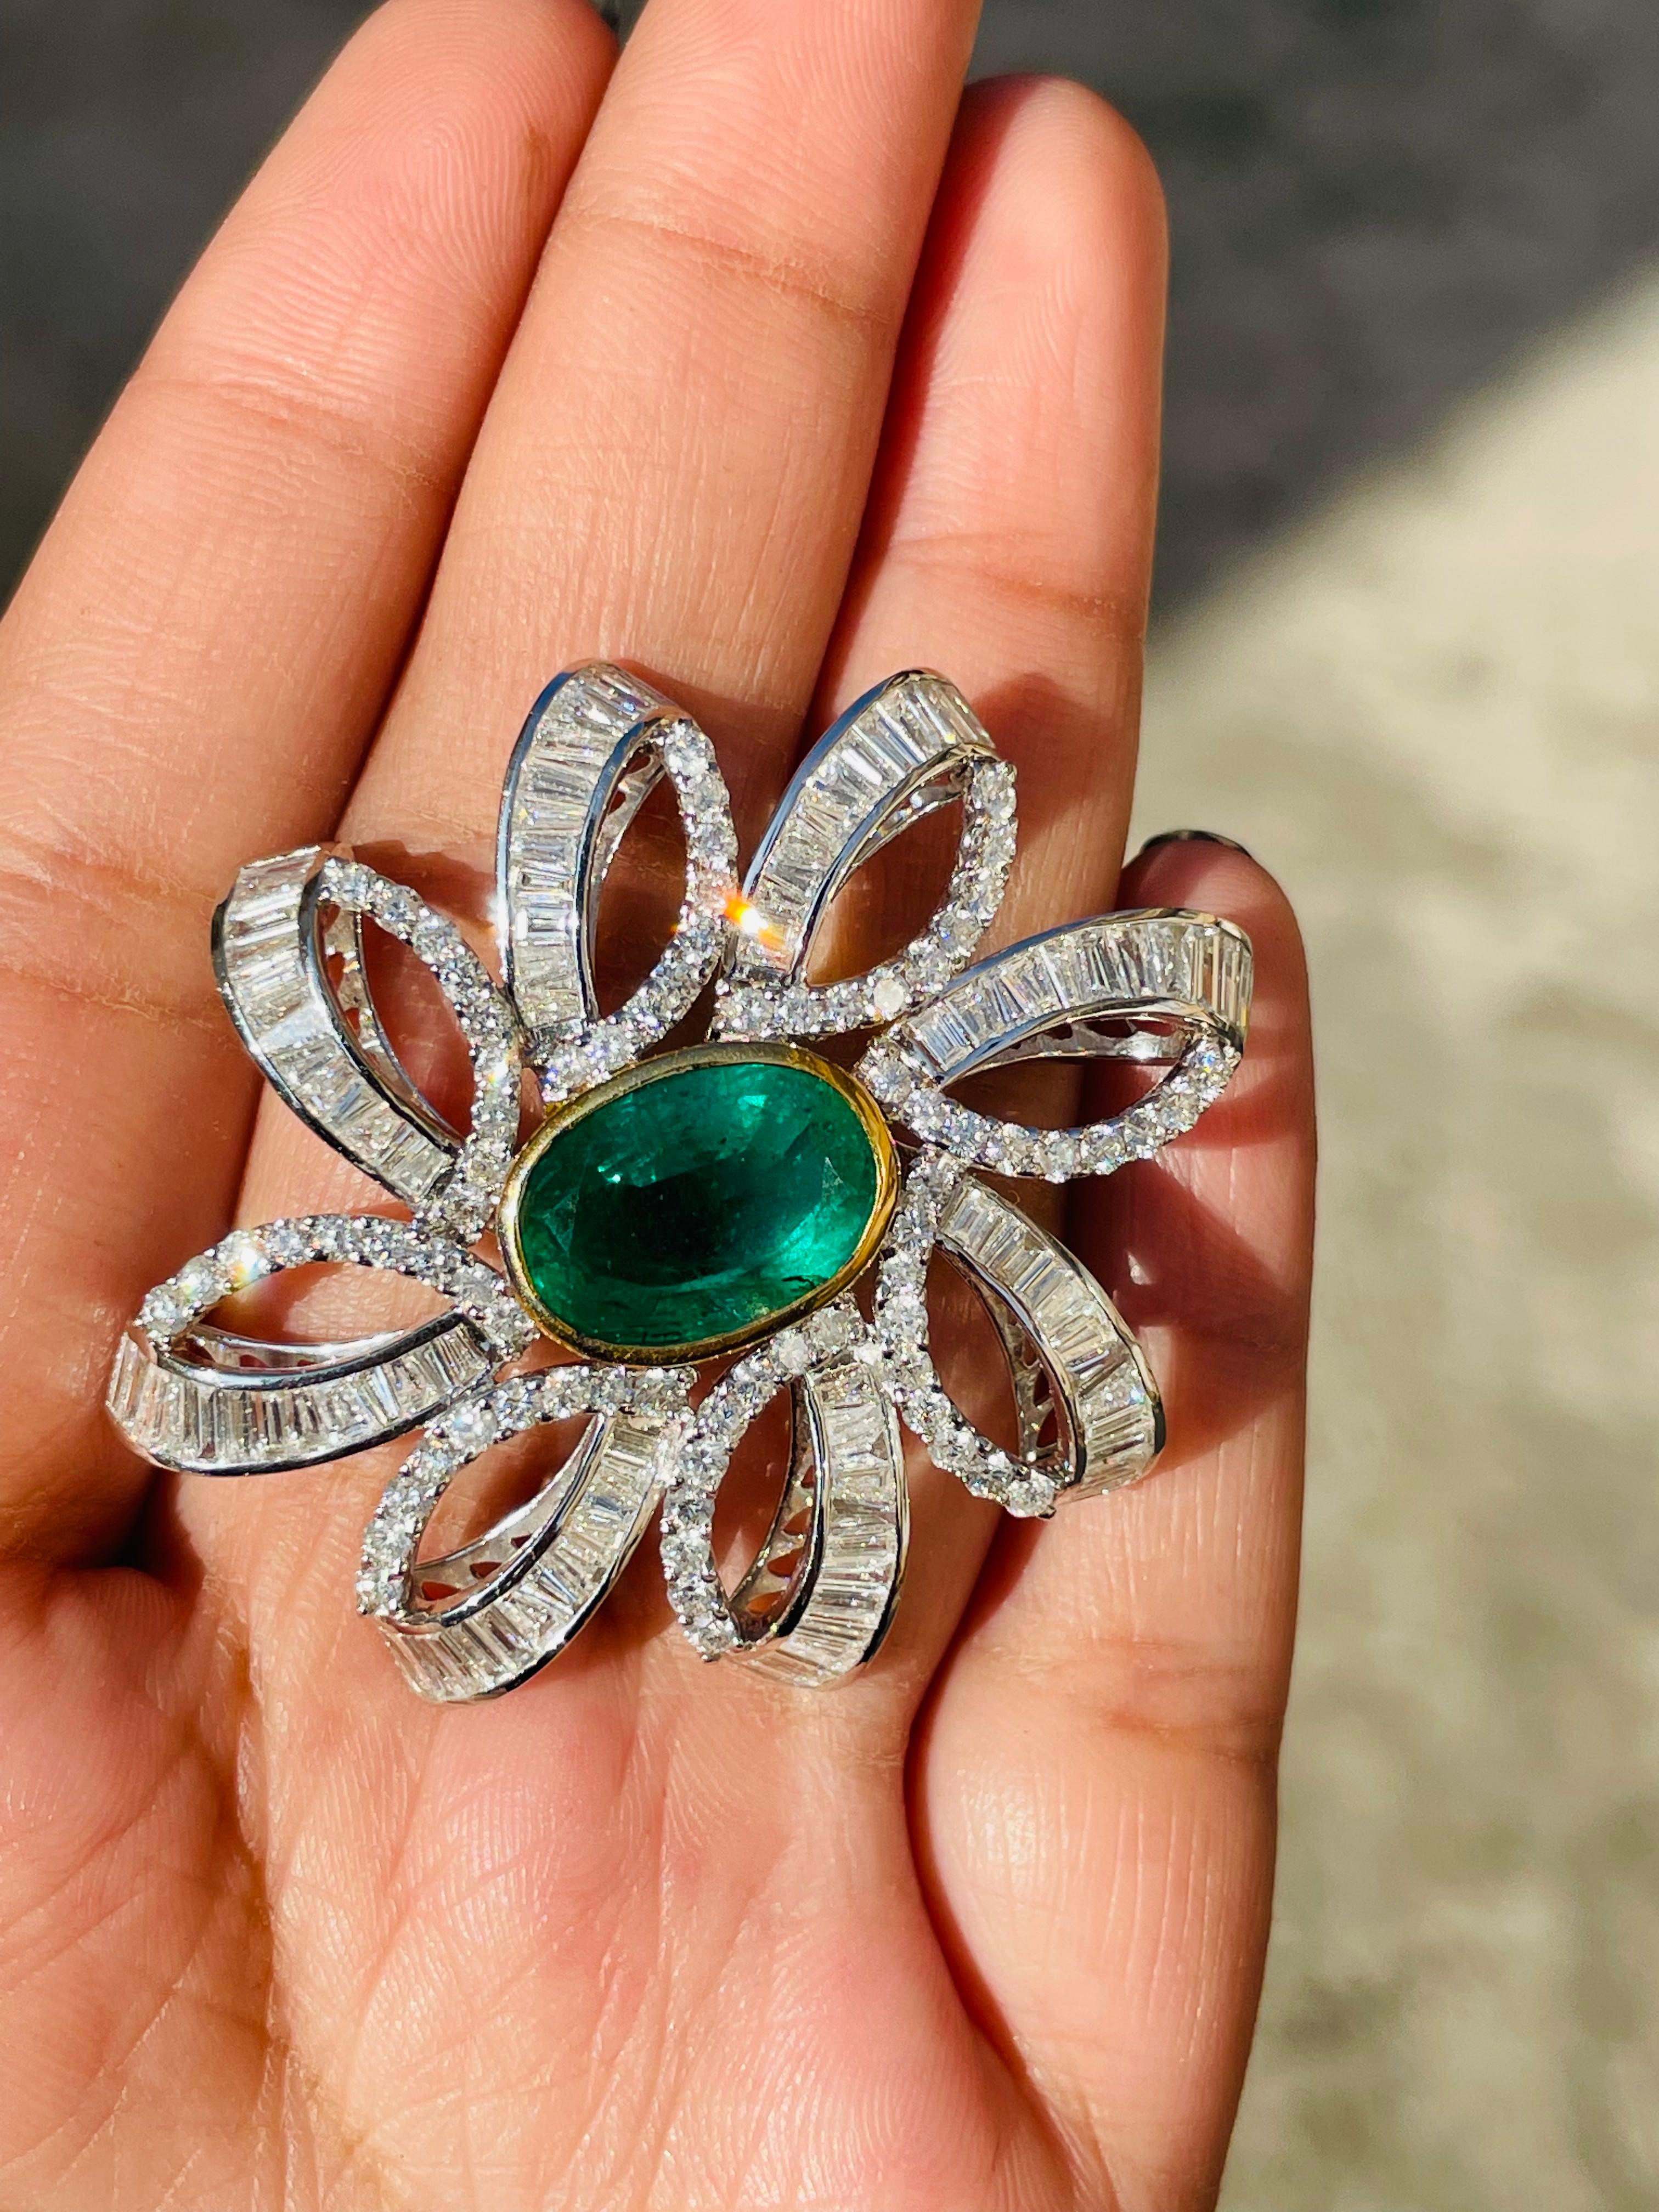 Oval Cut  18k Solid White Gold Diamond and 7.5 Carats Emerald Blooming Floral Brooch For Sale